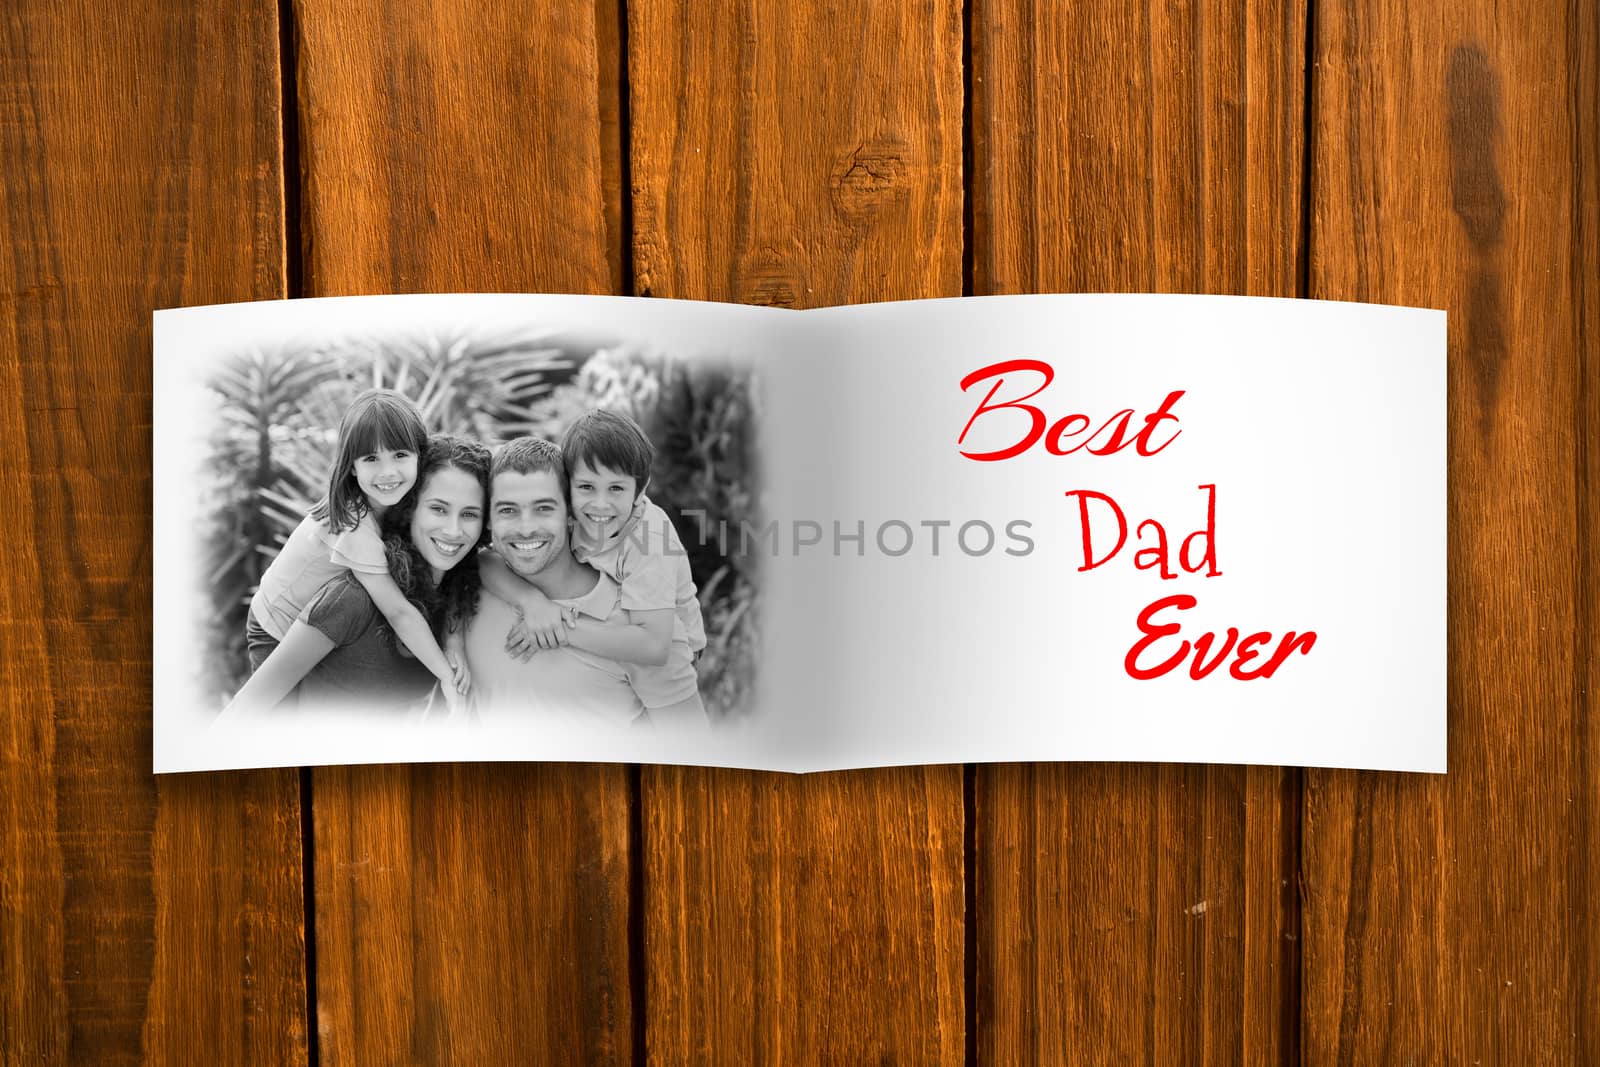 Attractive smiling father with family against overhead of wooden planks